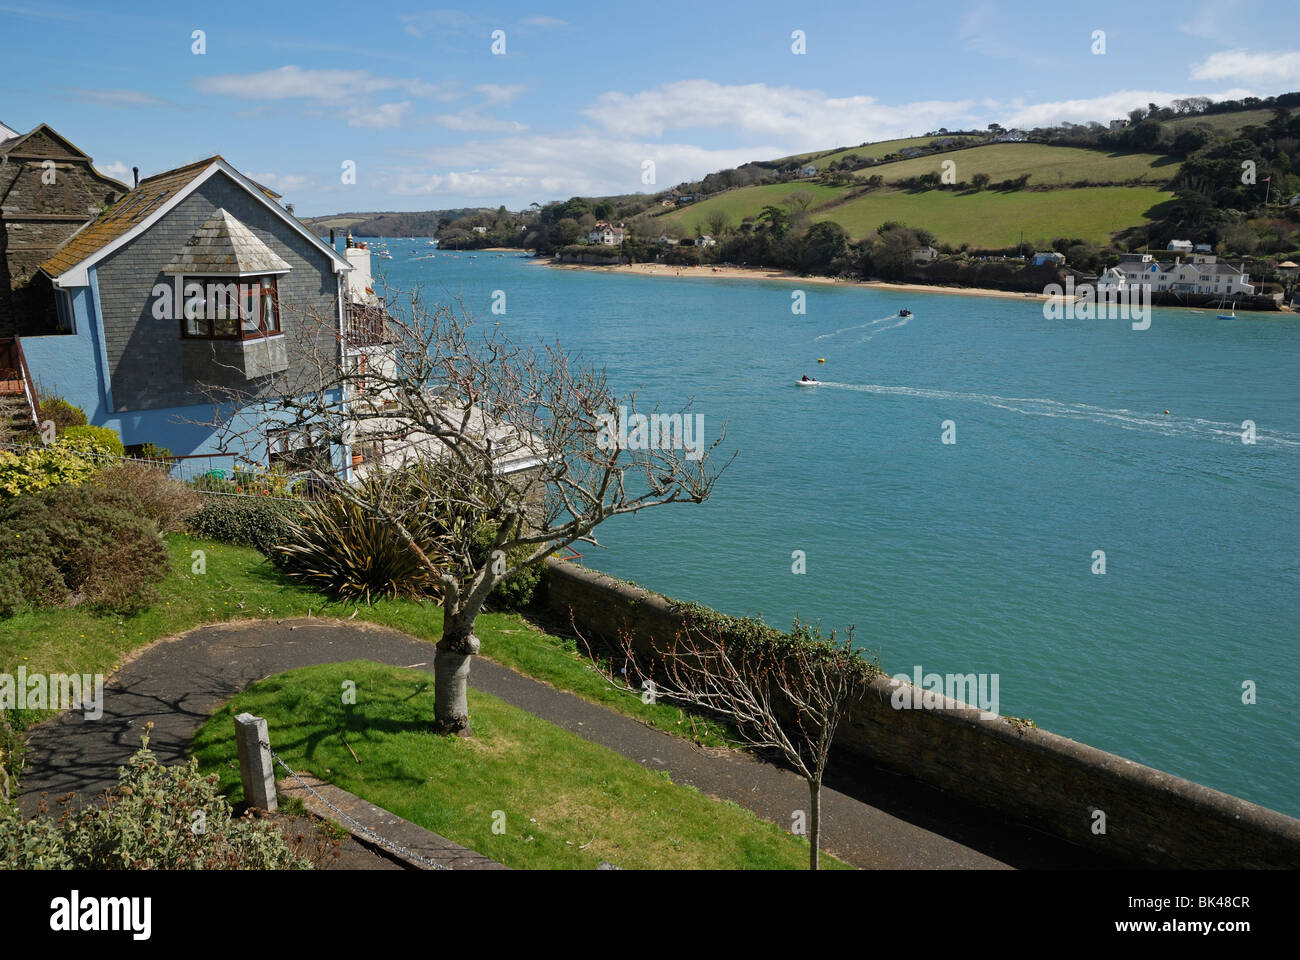 A terrace overlooking the estuary at Salcombe, South Devon, England. Stock Photo